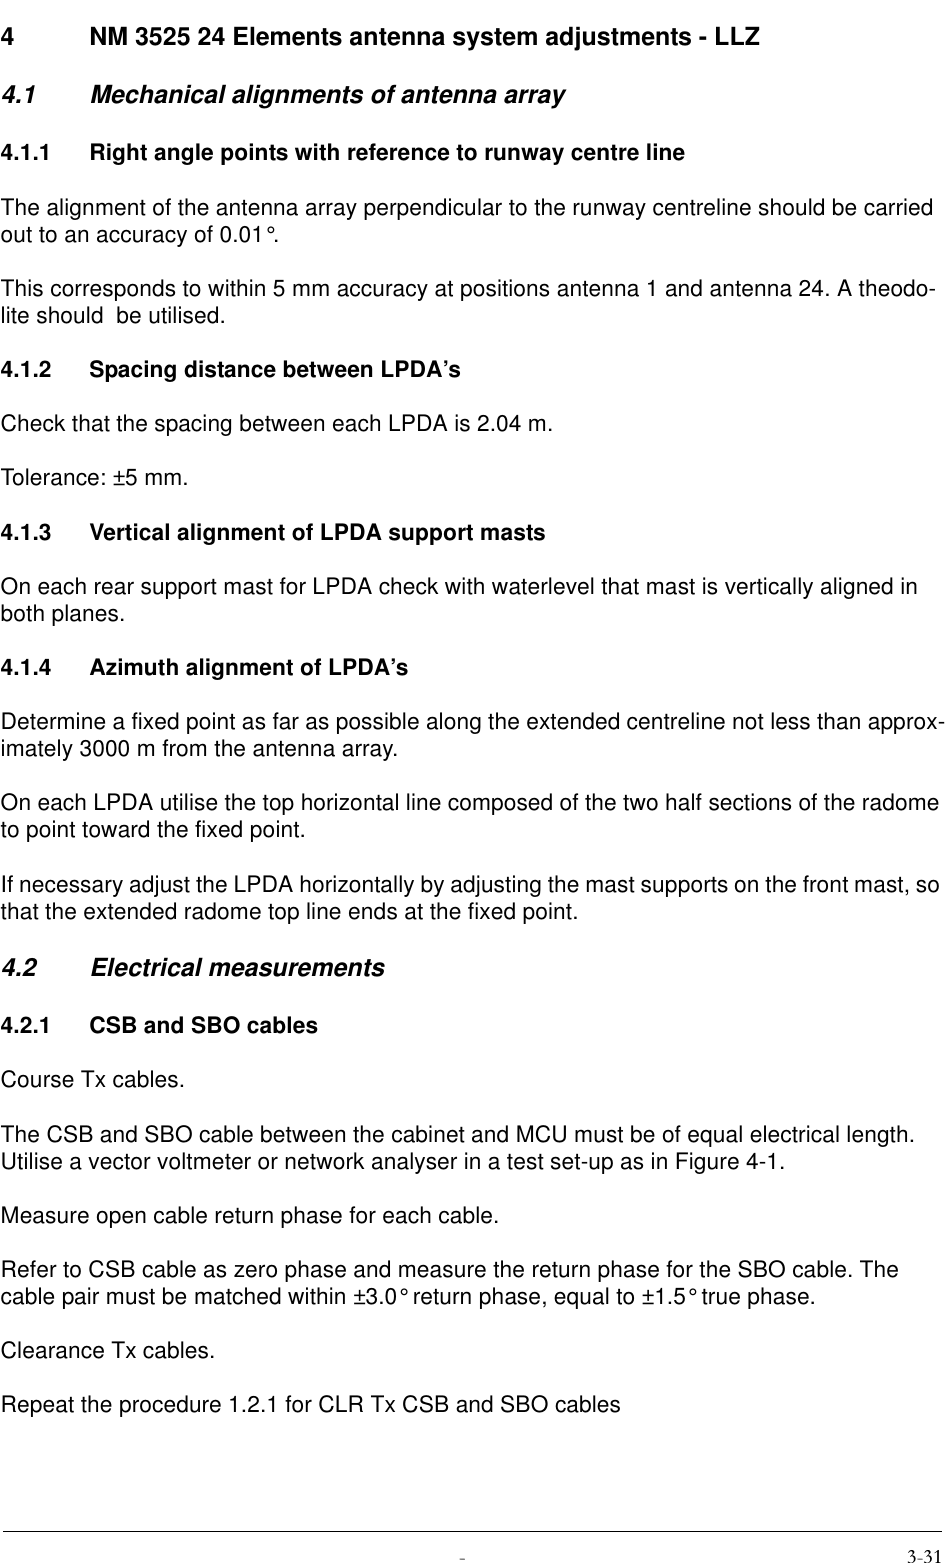  4 NM 3525 24 Elements antenna system adjustments - LLZ4.1 Mechanical alignments of antenna array4.1.1 Right angle points with reference to runway centre lineThe alignment of the antenna array perpendicular to the runway centreline should be carried out to an accuracy of 0.01°.This corresponds to within 5 mm accuracy at positions antenna 1 and antenna 24. A theodo-lite should  be utilised.4.1.2 Spacing distance between LPDA’sCheck that the spacing between each LPDA is 2.04 m.Tolerance: ±5 mm.4.1.3 Vertical alignment of LPDA support mastsOn each rear support mast for LPDA check with waterlevel that mast is vertically aligned in both planes.4.1.4 Azimuth alignment of LPDA’sDetermine a fixed point as far as possible along the extended centreline not less than approx-imately 3000 m from the antenna array.On each LPDA utilise the top horizontal line composed of the two half sections of the radome to point toward the fixed point.If necessary adjust the LPDA horizontally by adjusting the mast supports on the front mast, so that the extended radome top line ends at the fixed point.4.2 Electrical measurements4.2.1 CSB and SBO cablesCourse Tx cables.The CSB and SBO cable between the cabinet and MCU must be of equal electrical length. Utilise a vector voltmeter or network analyser in a test set-up as in Figure 4-1.Measure open cable return phase for each cable.Refer to CSB cable as zero phase and measure the return phase for the SBO cable. The cable pair must be matched within ±3.0° return phase, equal to ±1.5° true phase.Clearance Tx cables.Repeat the procedure 1.2.1 for CLR Tx CSB and SBO cables